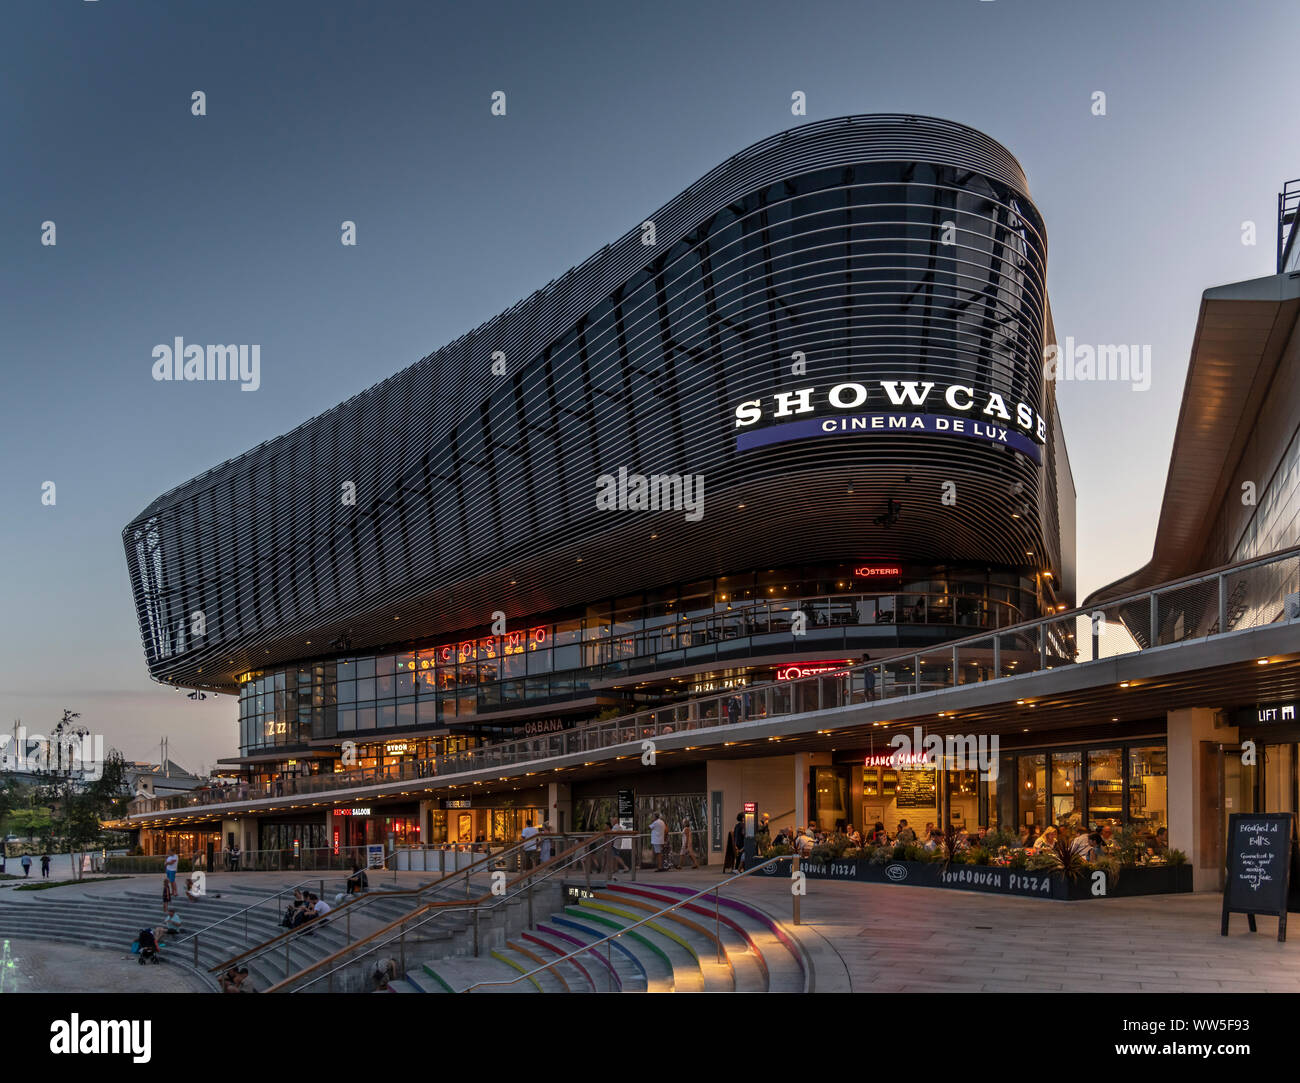 West Quay shopping centre with Showcase Cinema above. Southampton. Designed by London architects Acme Space. Stock Photo